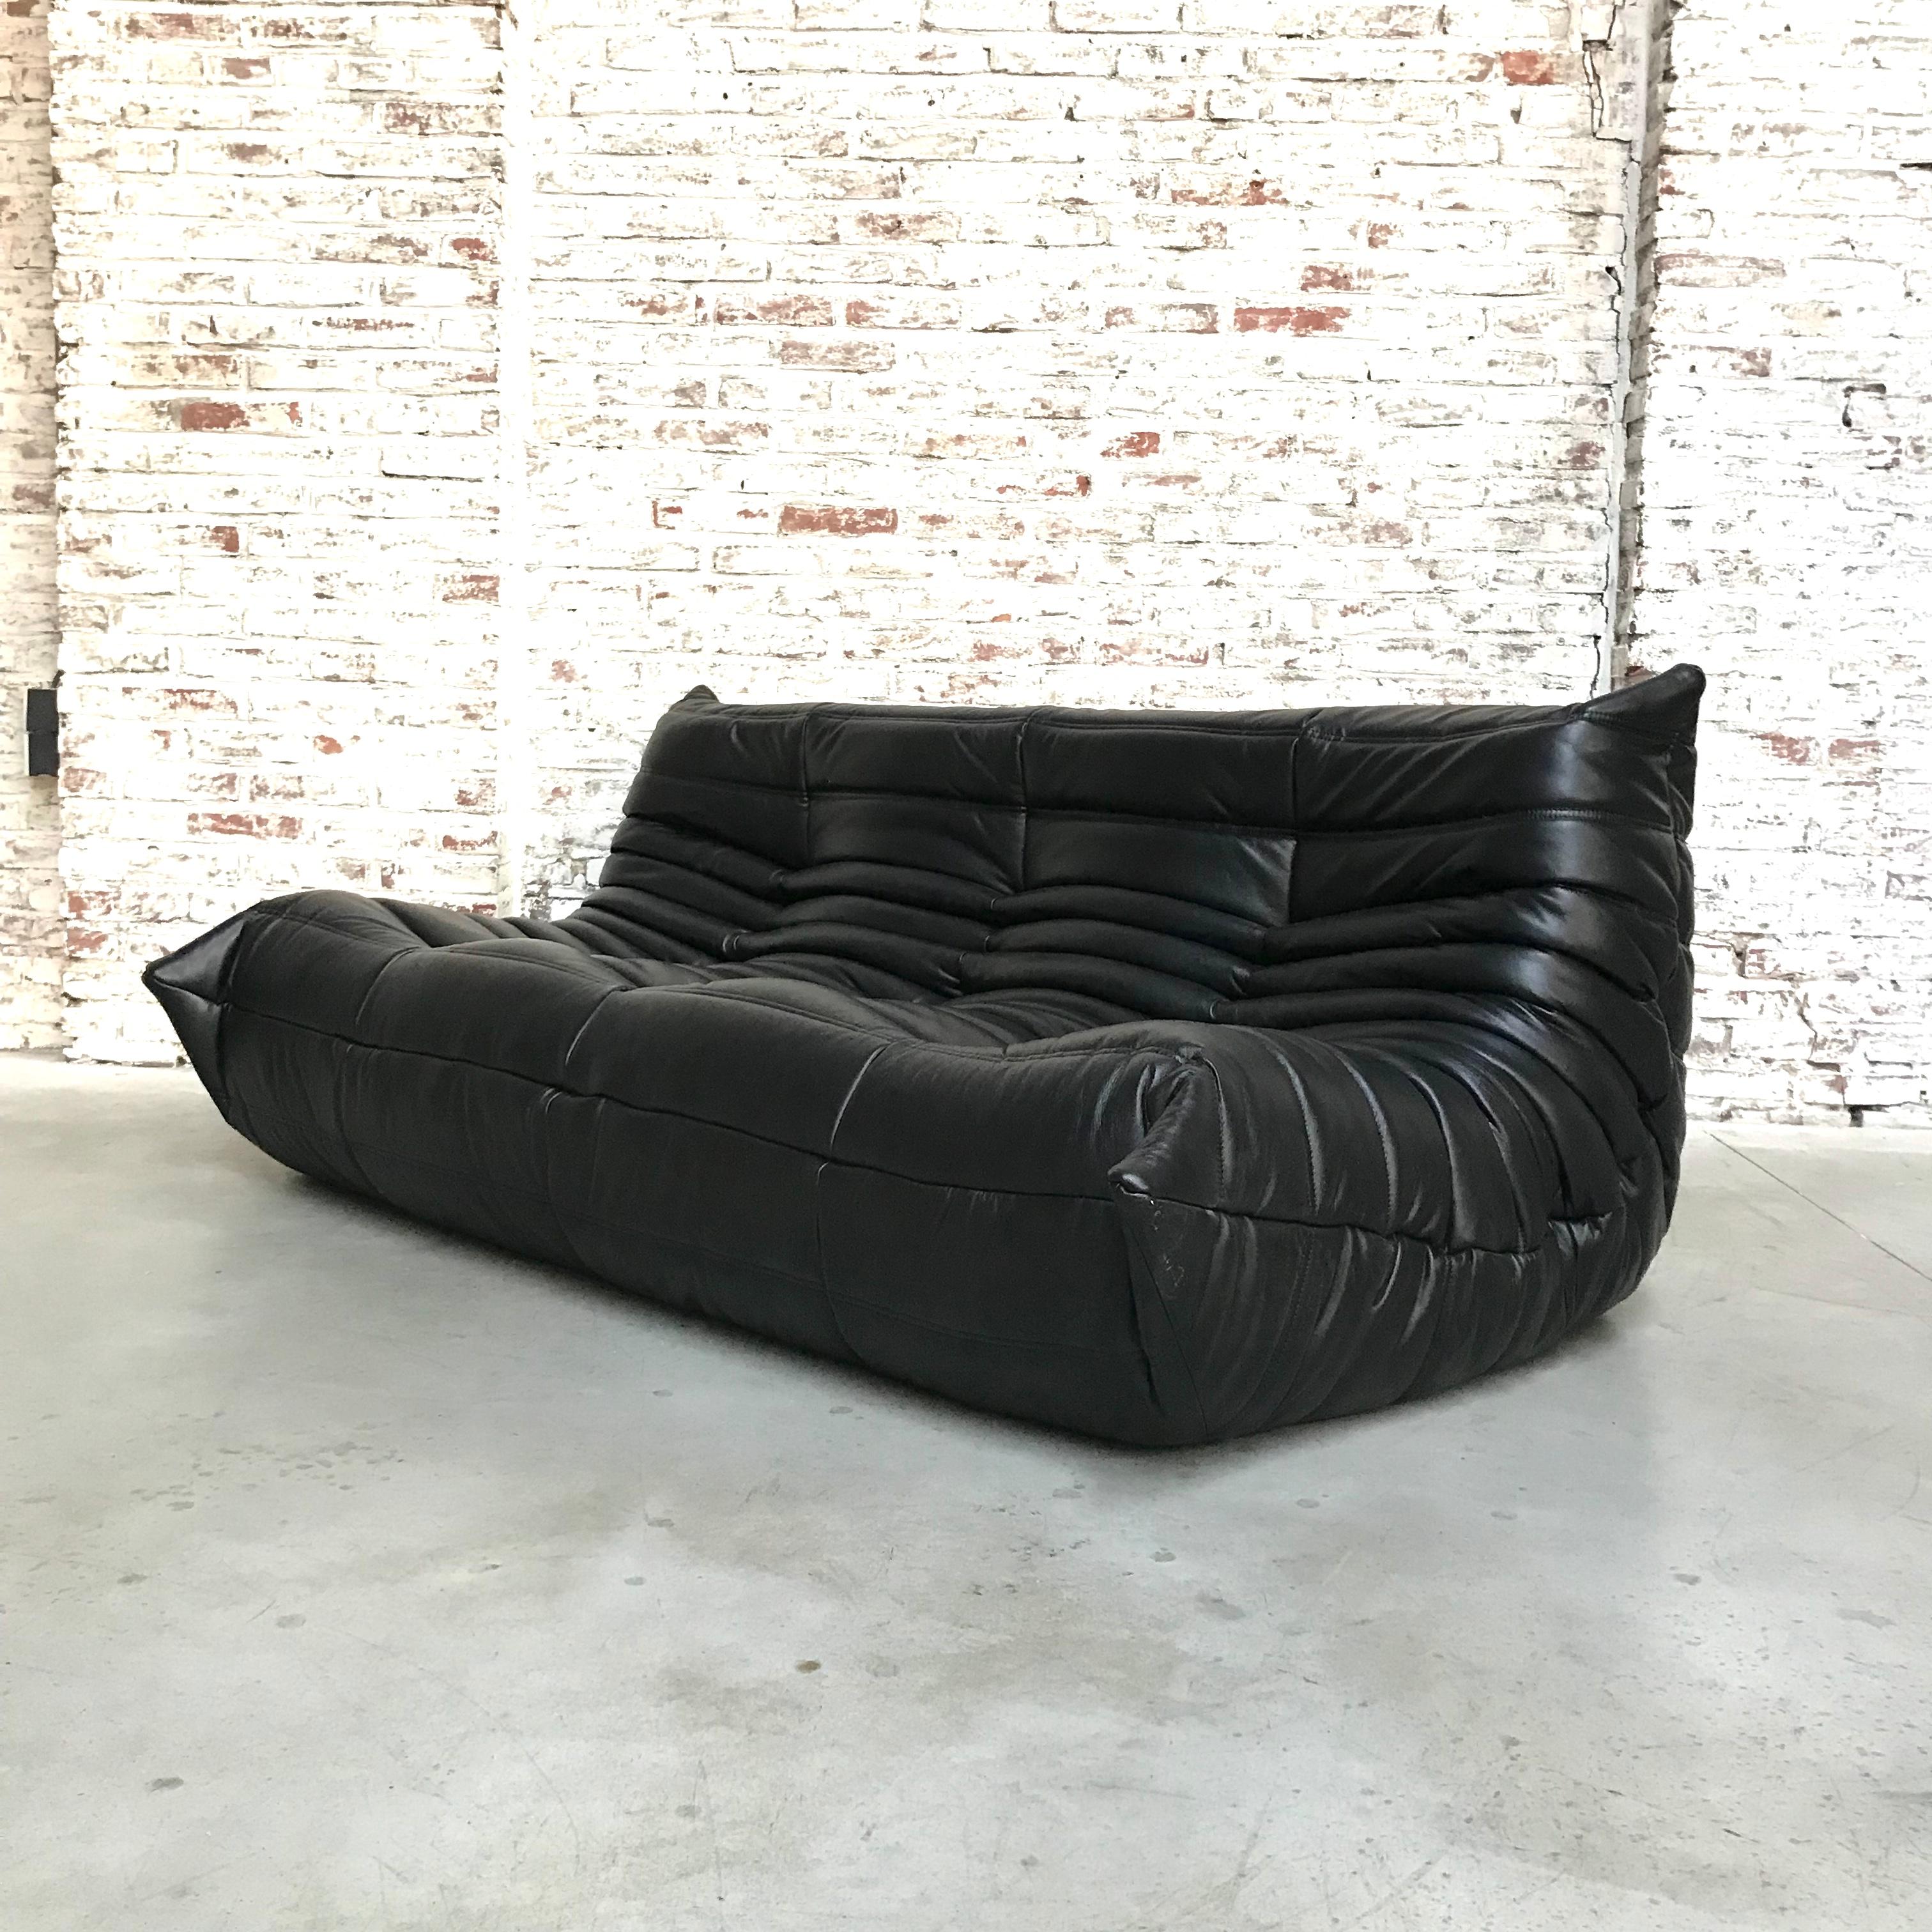 The Togo is designed by Michel Ducaroy in 1973 for Ligne Roset in 1973 but is still very popular today. This Togo is refurbished. Weak parts of foam have been replaced by firm new ones. Thereafter the sofa is reuphostered in fine Italian black